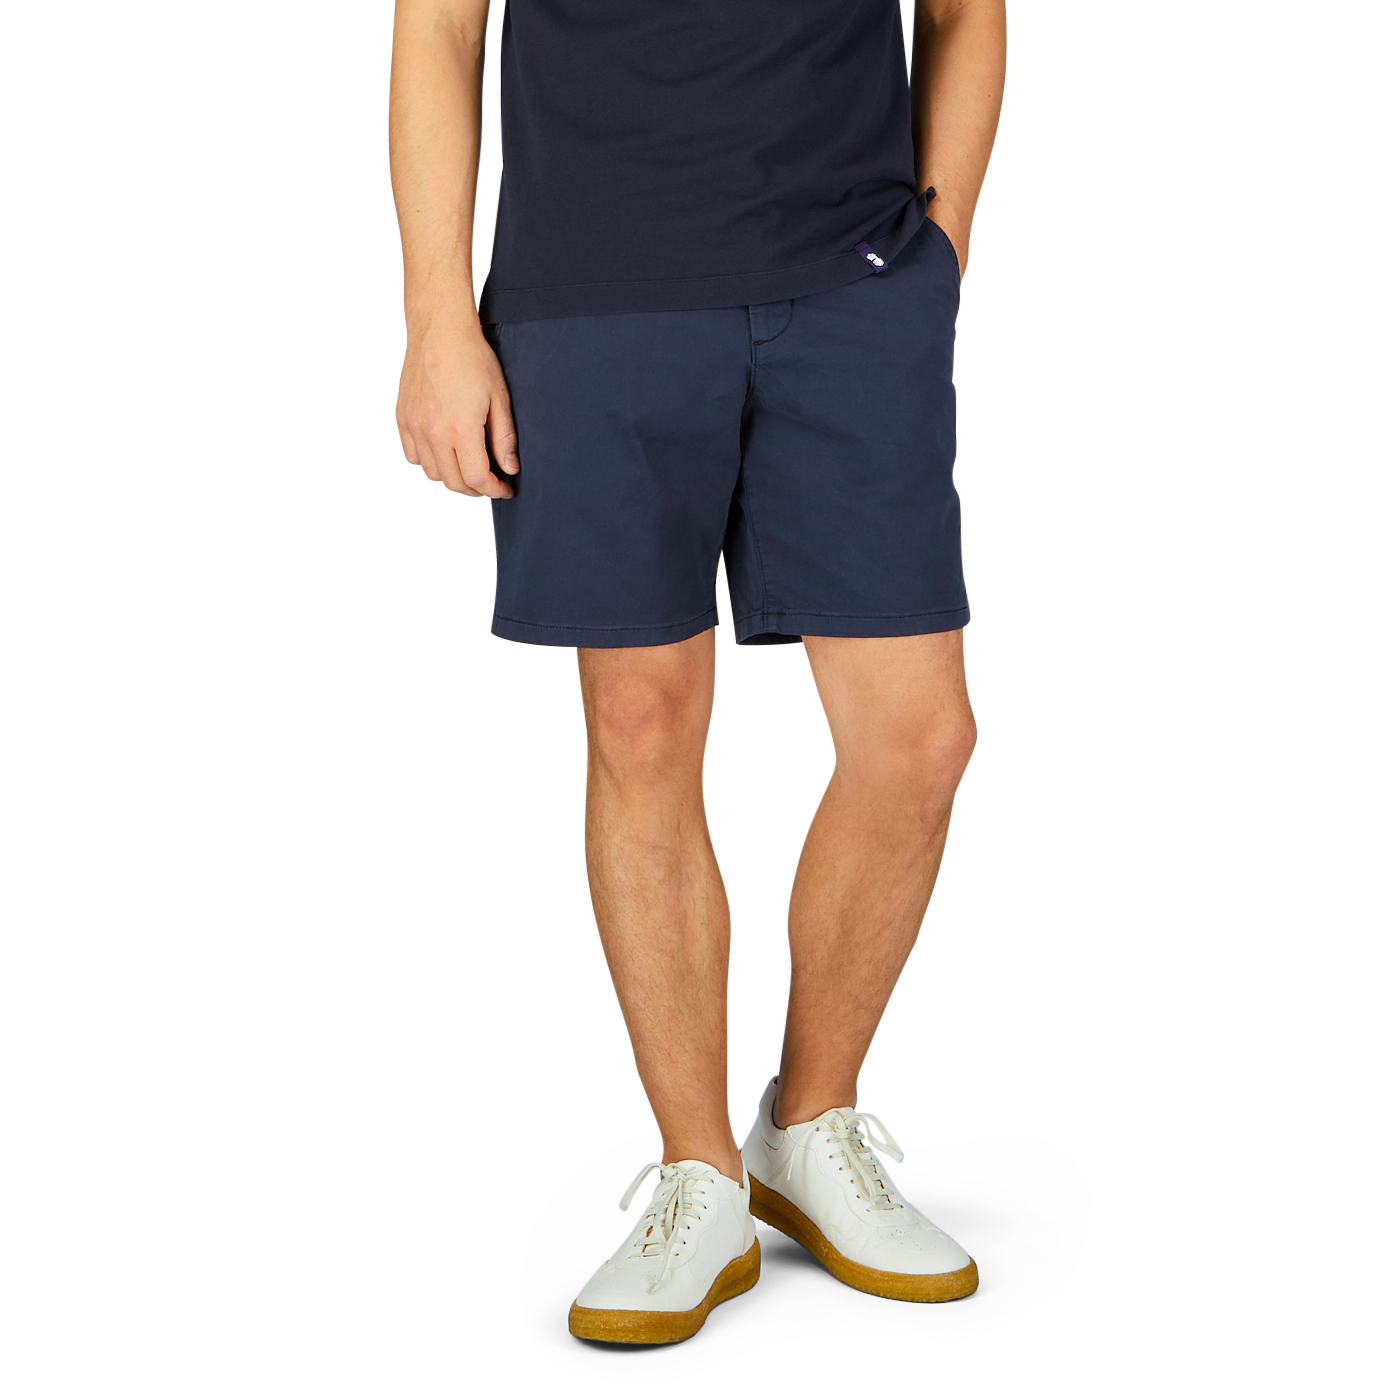 Man wearing Navy Blue Cotton Blend Phillips Shorts by Paige and white sneakers with yellow soles against a neutral background.